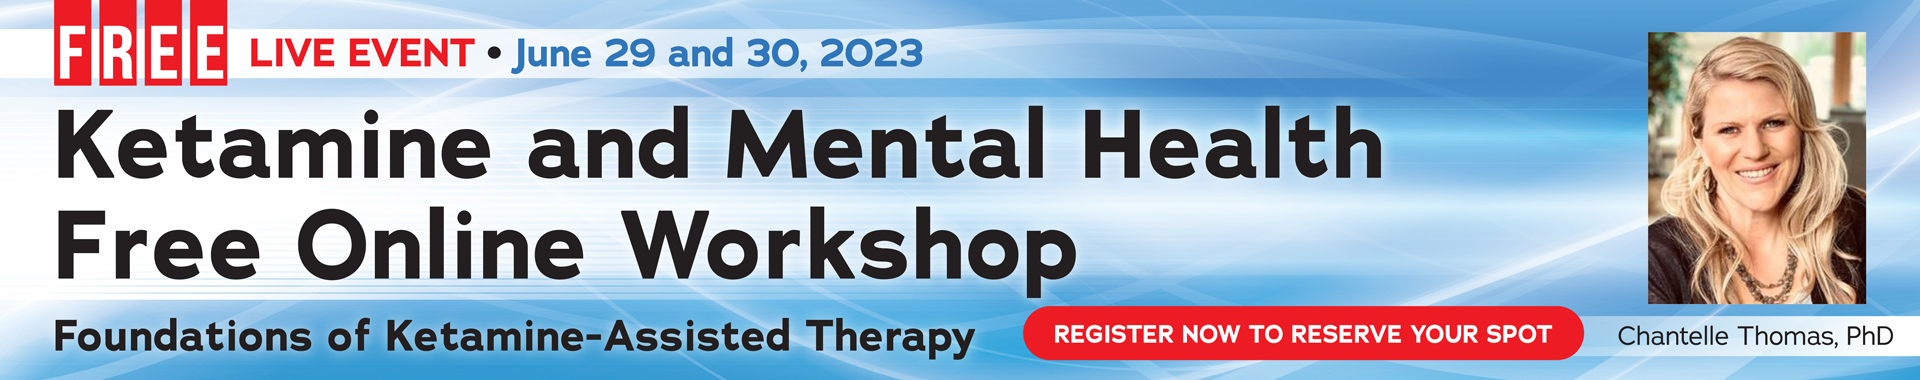 Ketamine and Mental Health Free Online Workshop: Foundations of Ketamine Assisted-Therapy